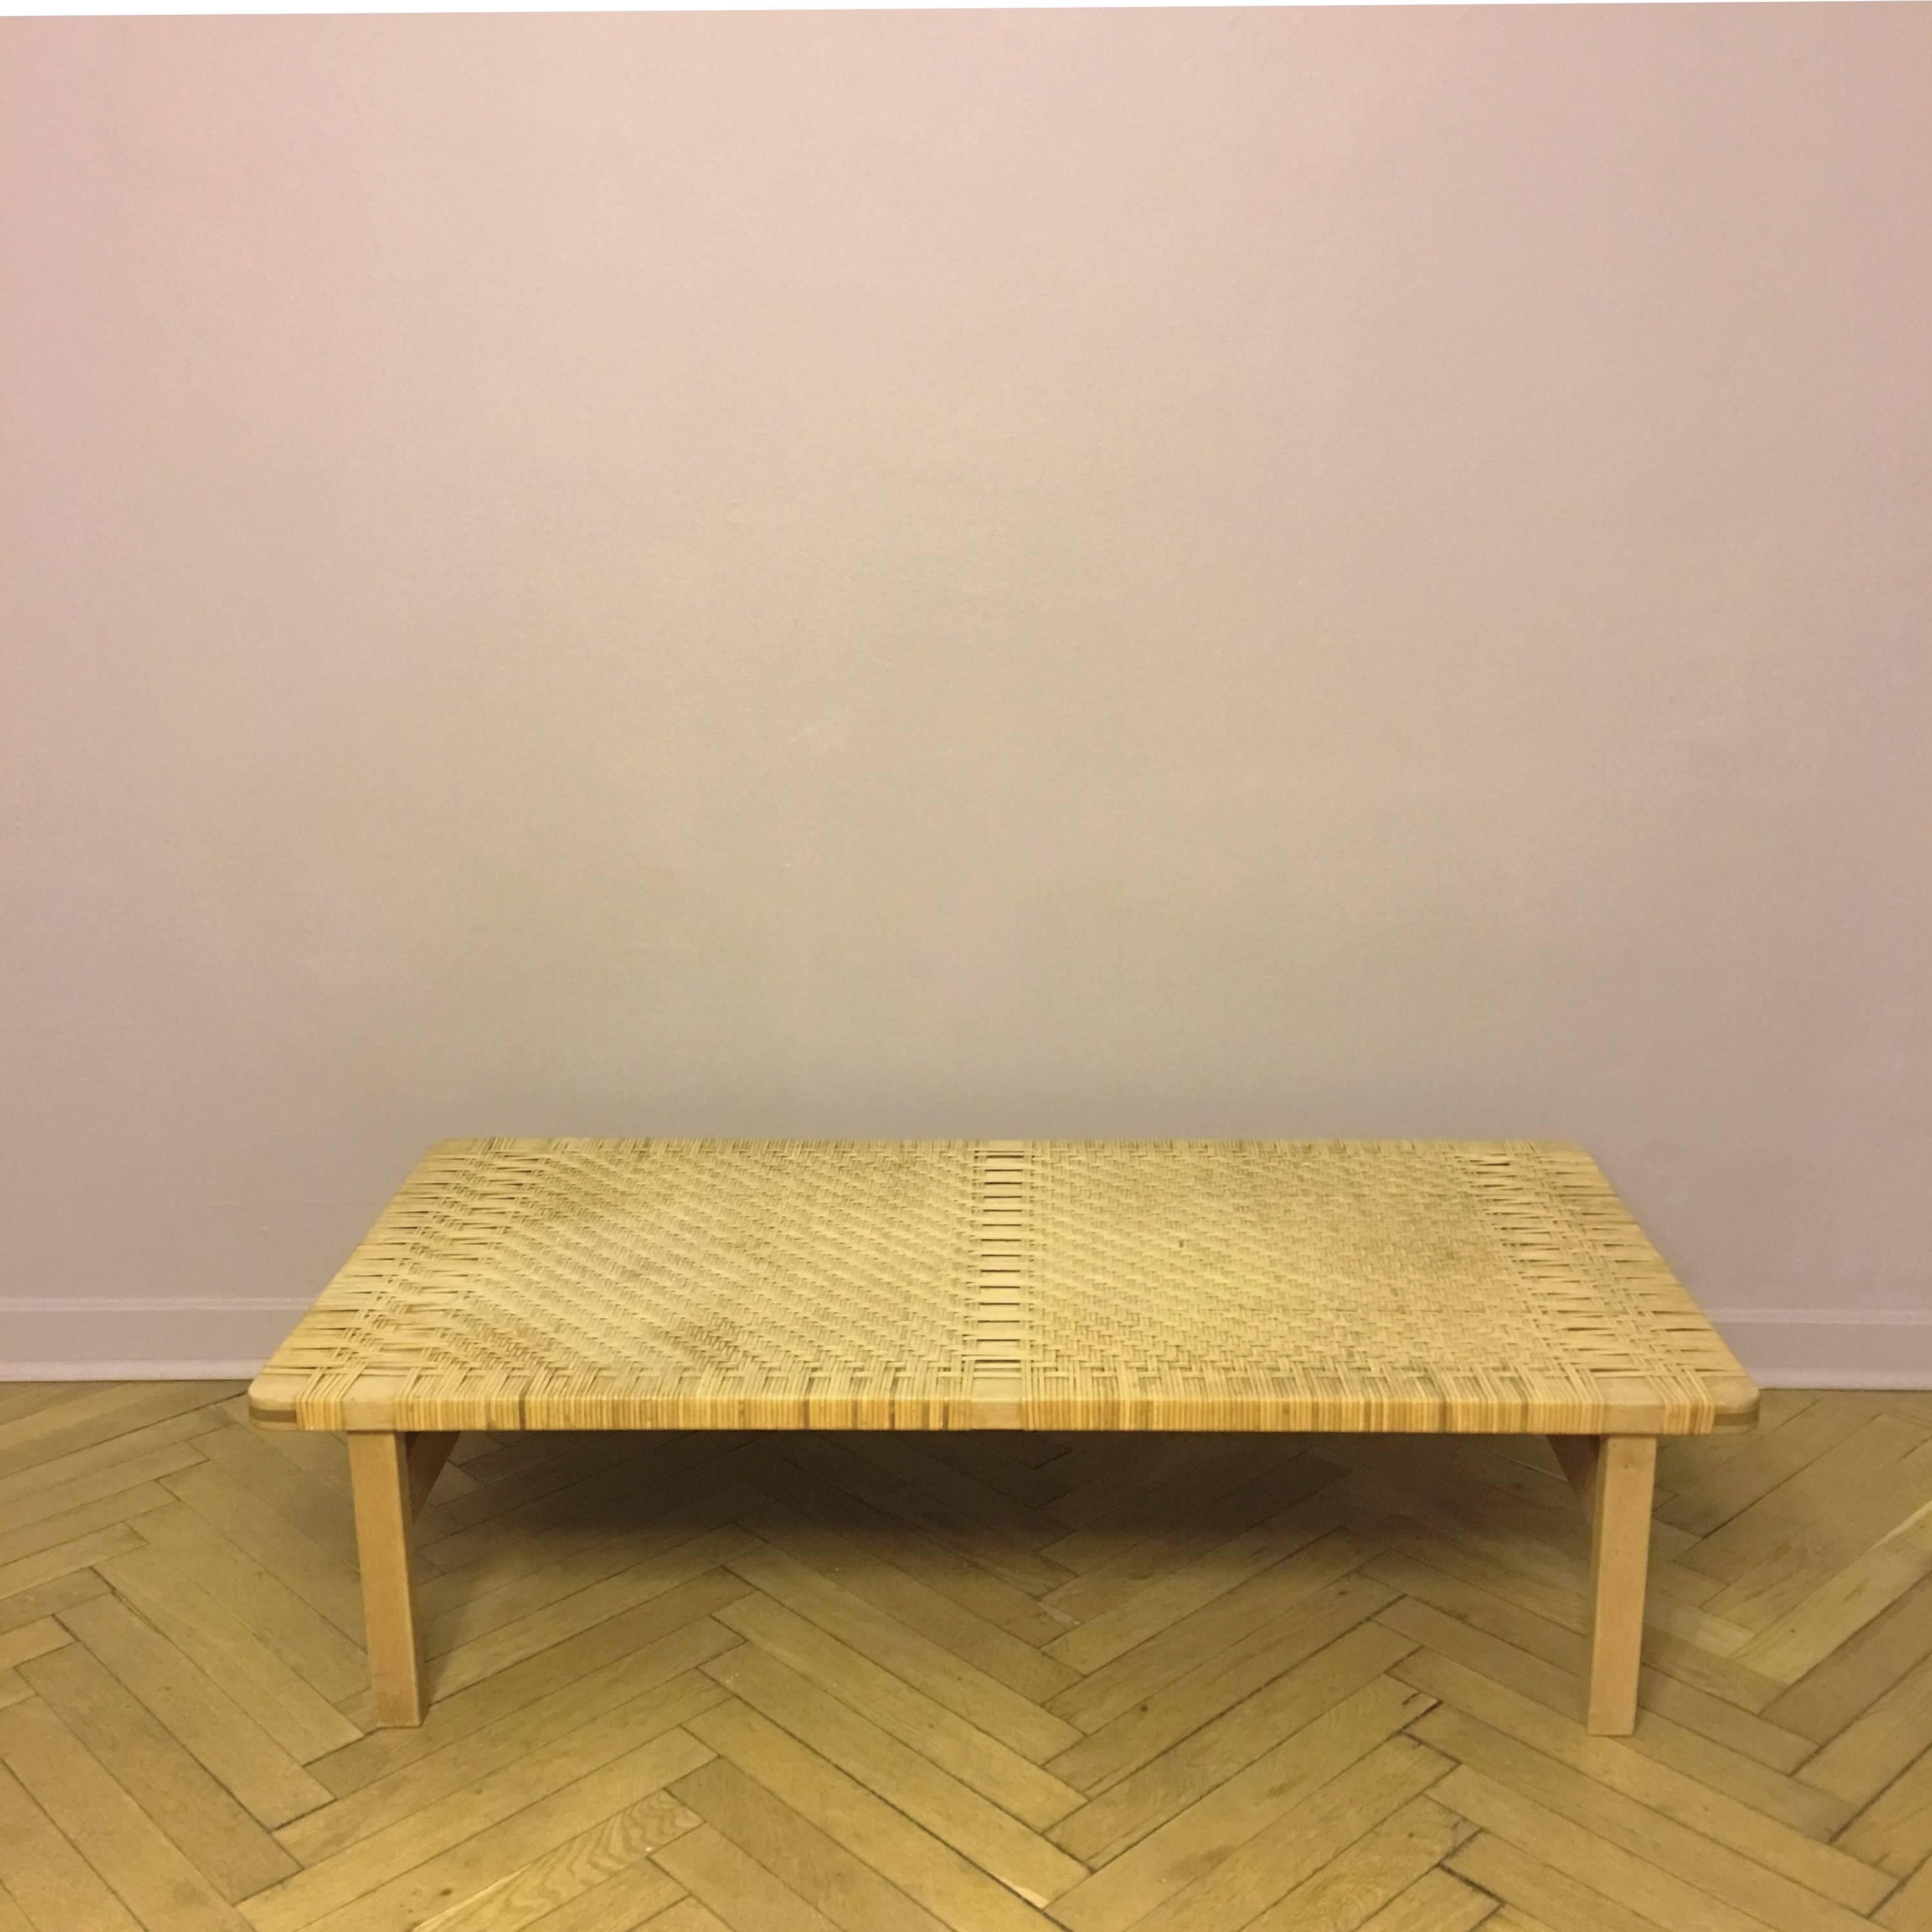 Original Børge Mogensen model 5273 table or bench made in Denmark. The table or bench is made of oak and cane and is in mint condition
From Fredericia Stolefabrik
The table or bench is bought from one of the workers from Fredericia Stolefabrik, so